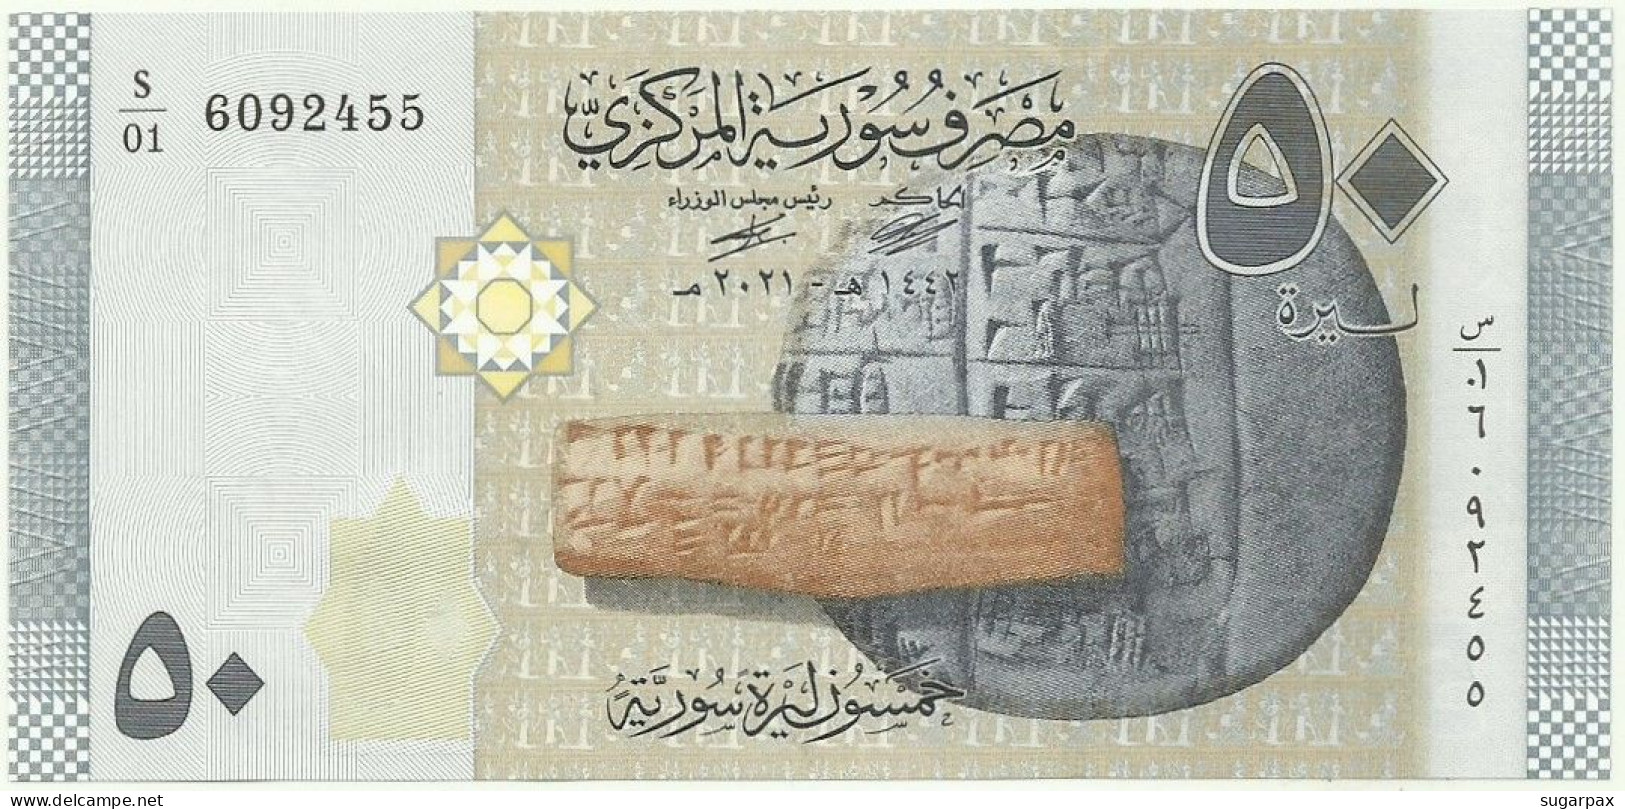 Syria - 50 Syrian Pounds - 2021 / AH 1442 - Pick 112.NEW - Unc. - Serie S/01 - Syrië